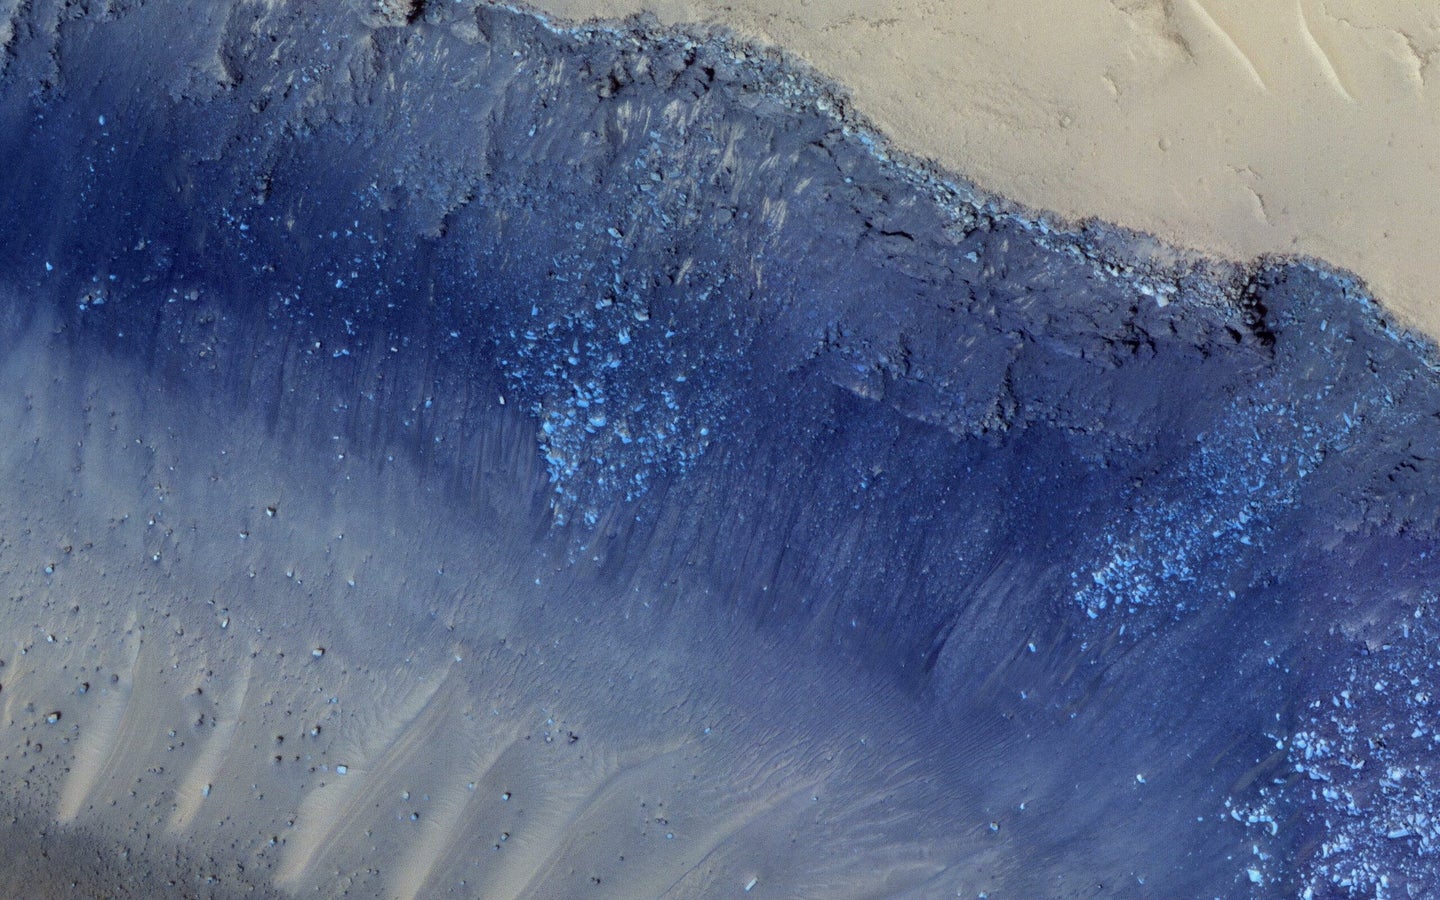 A blue-colored cliff on Mars.